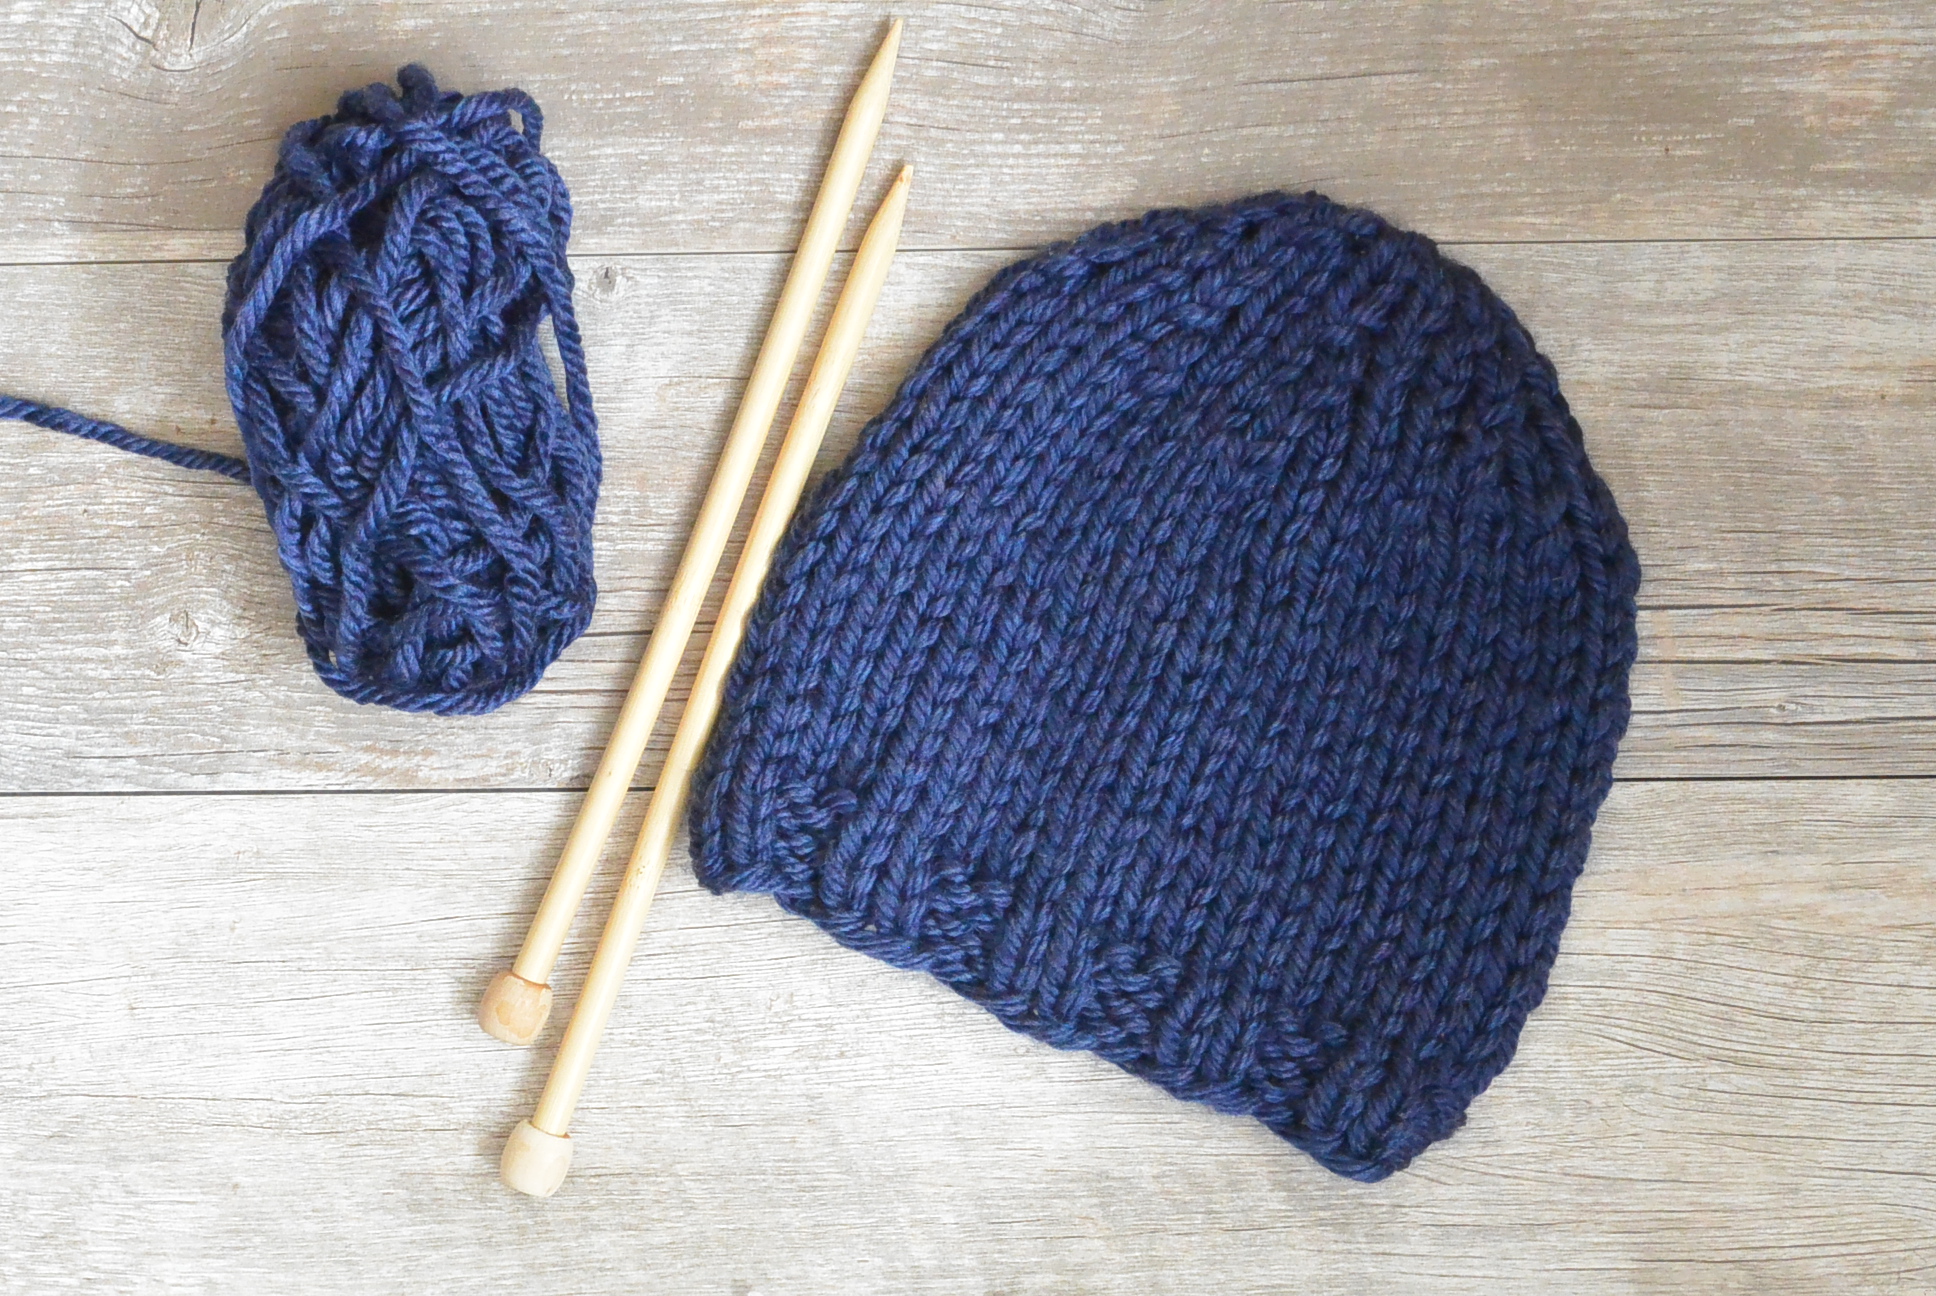 Learn to Knit in Just One Day